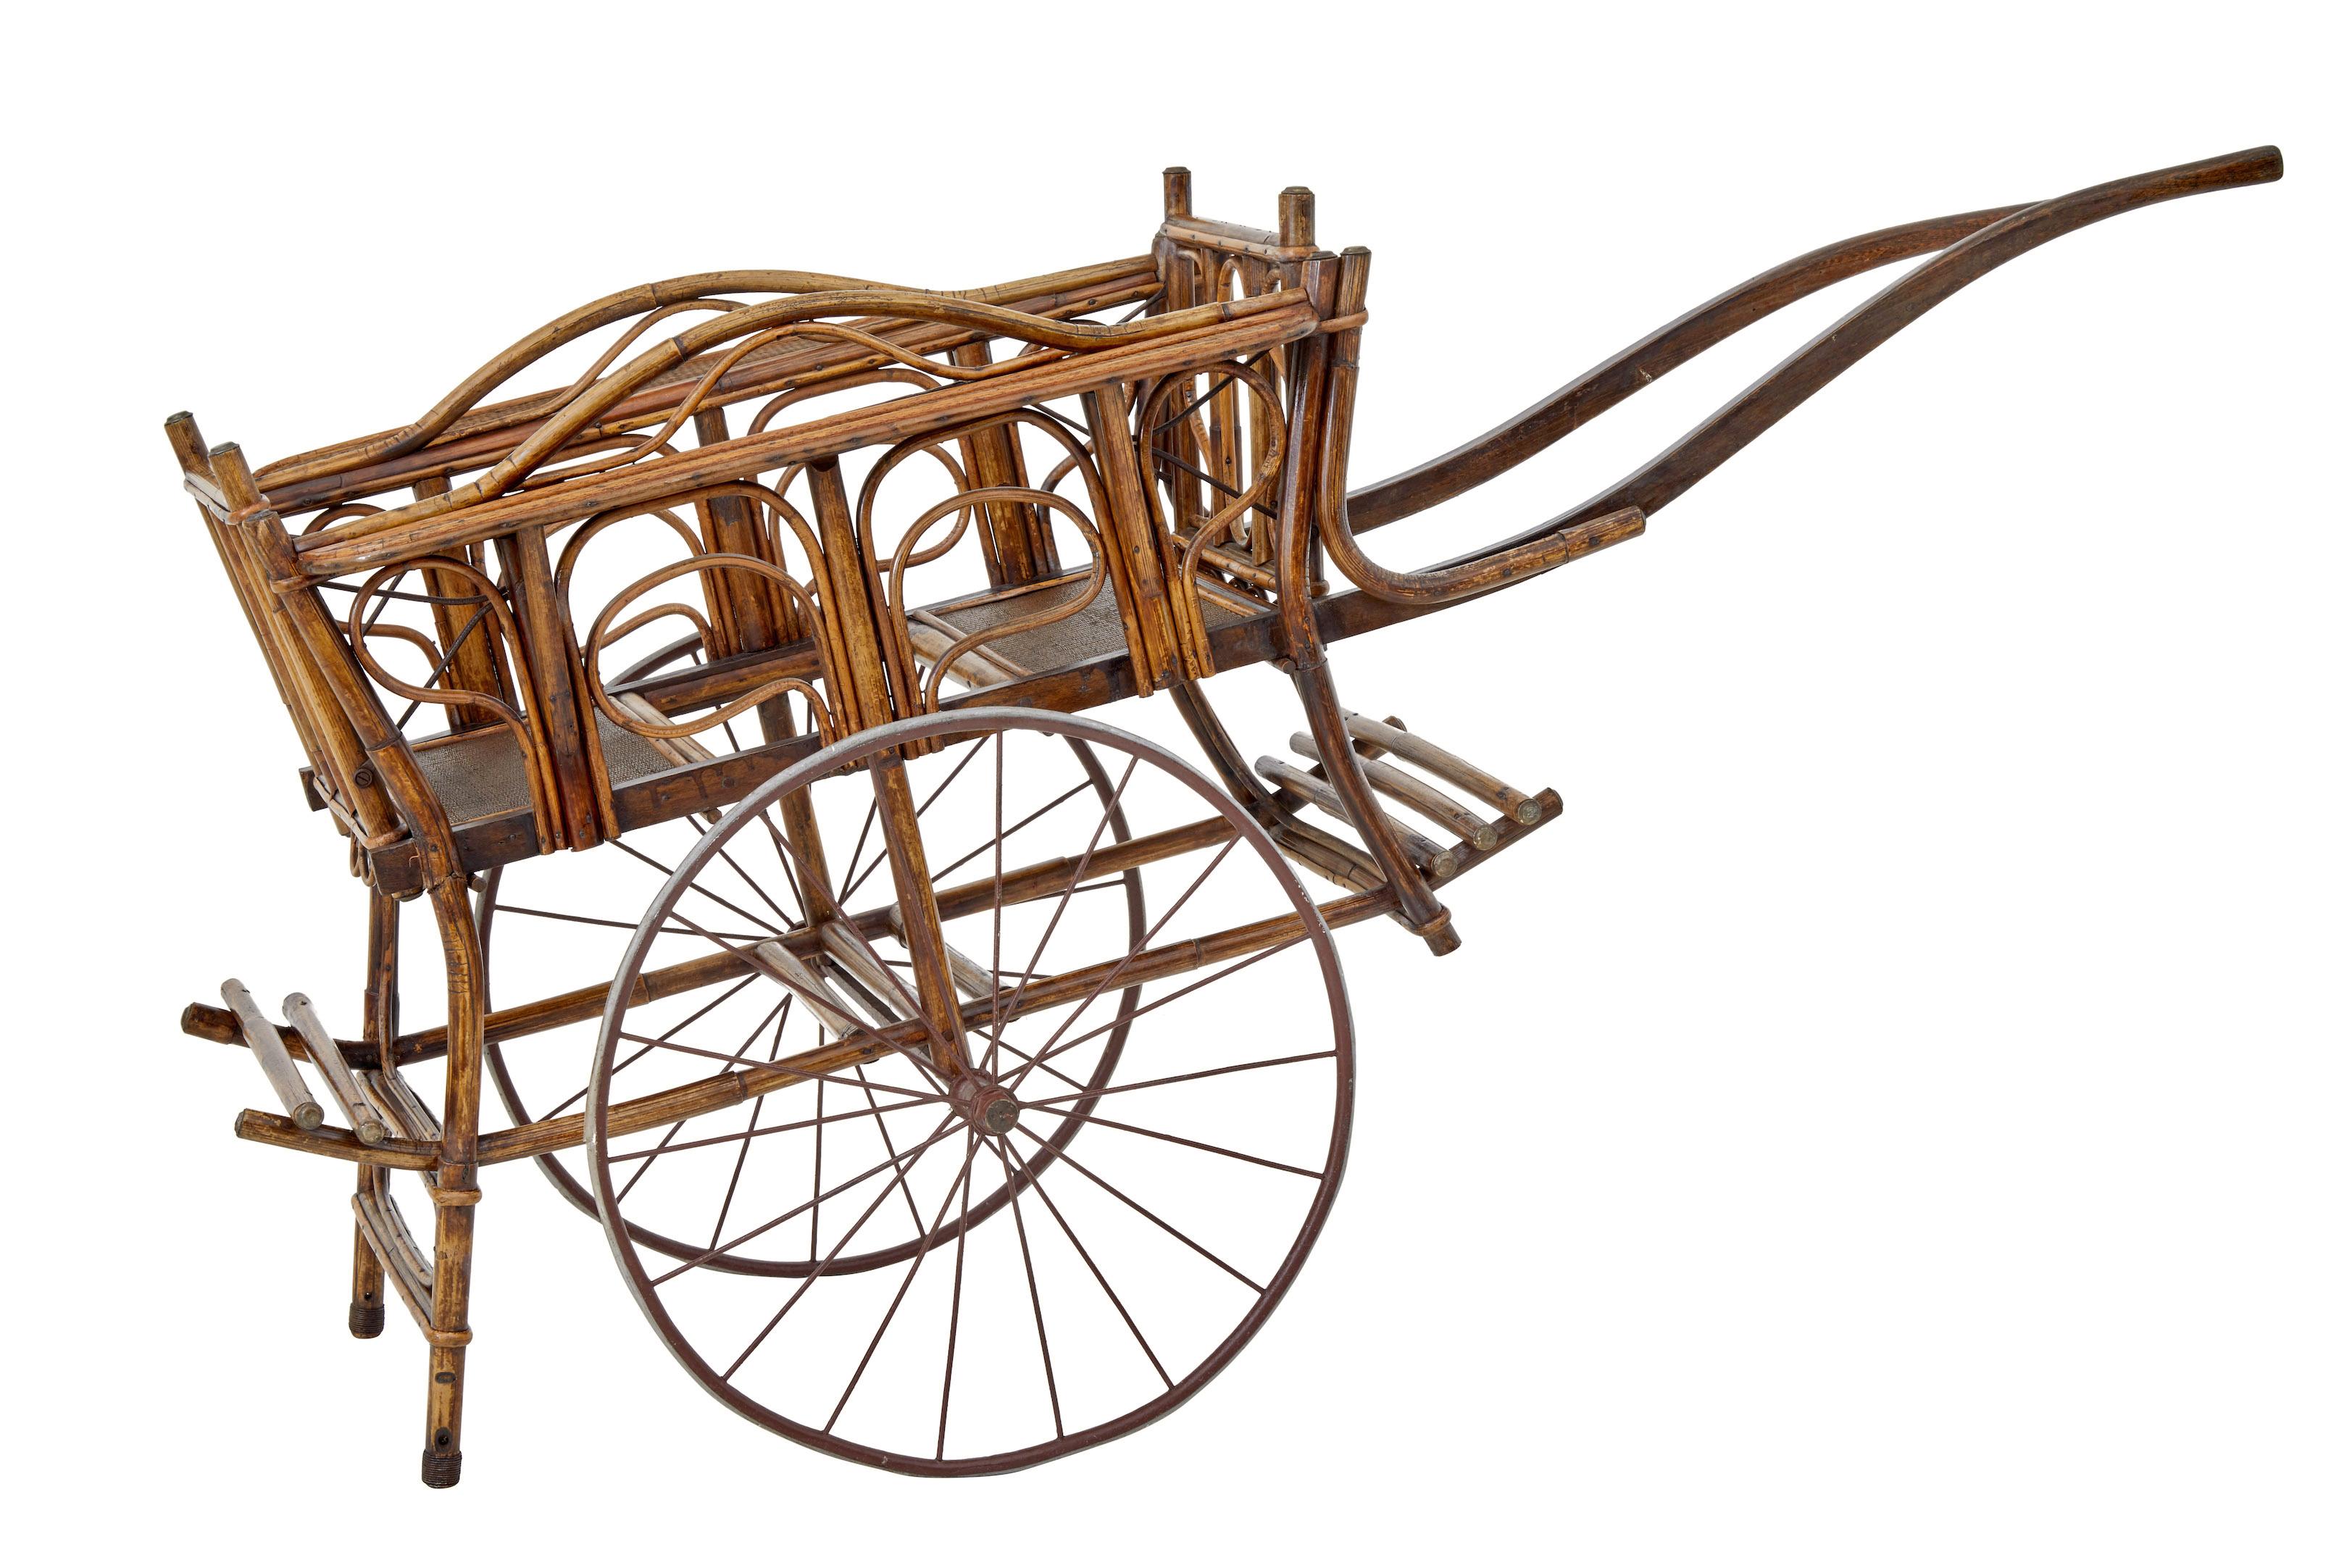 Unusual possibly chinese bamboo 2 seater children's carriage circa 1900.

Made from shaped bamboo, bound in the traditional way with additional iron work supports.
Backs of seats flip over so the children can sit back to back or facing each